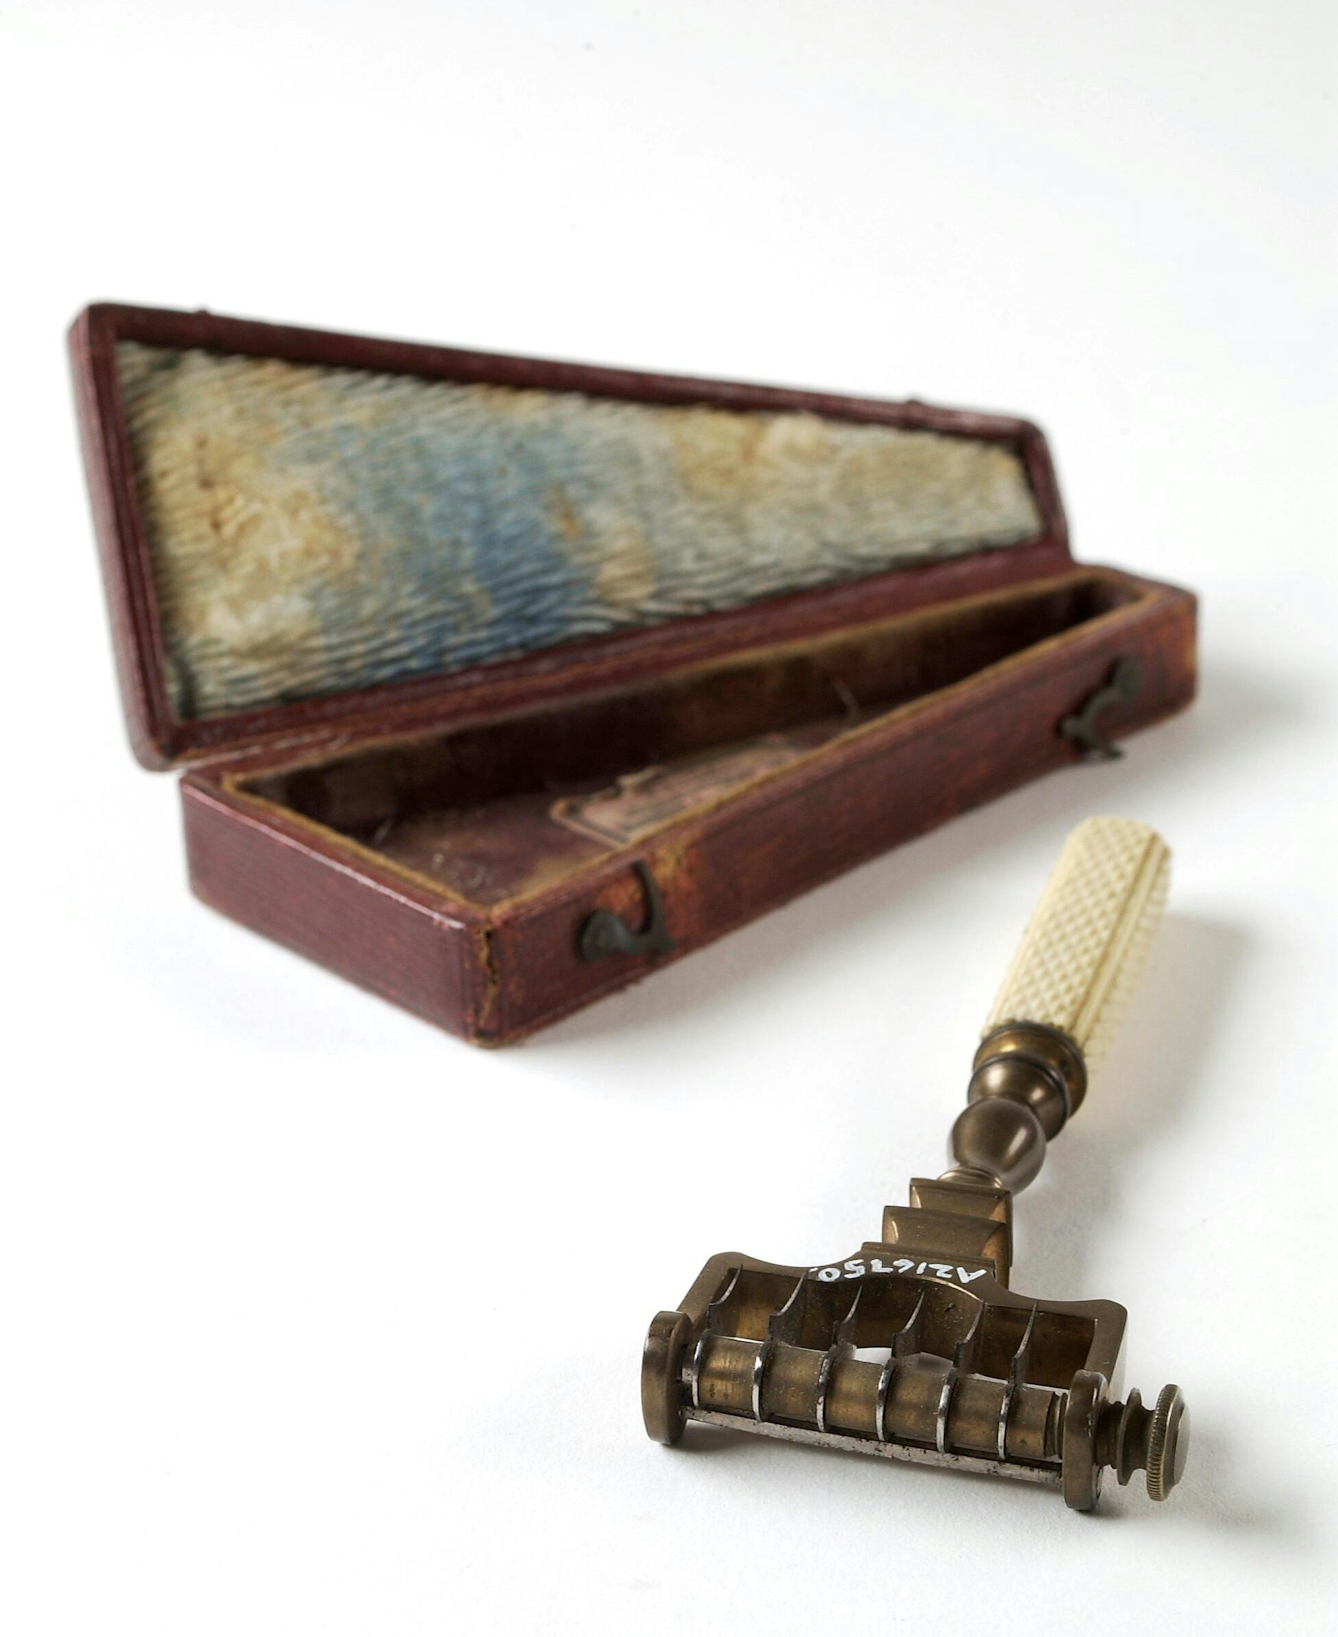 Colour photograph of a device called a scarificator beside its wooden box. The scarificator looks a bit like a safety razor with an ivory handle, but has lots of sharp blades ready to spring out and cut the skin.